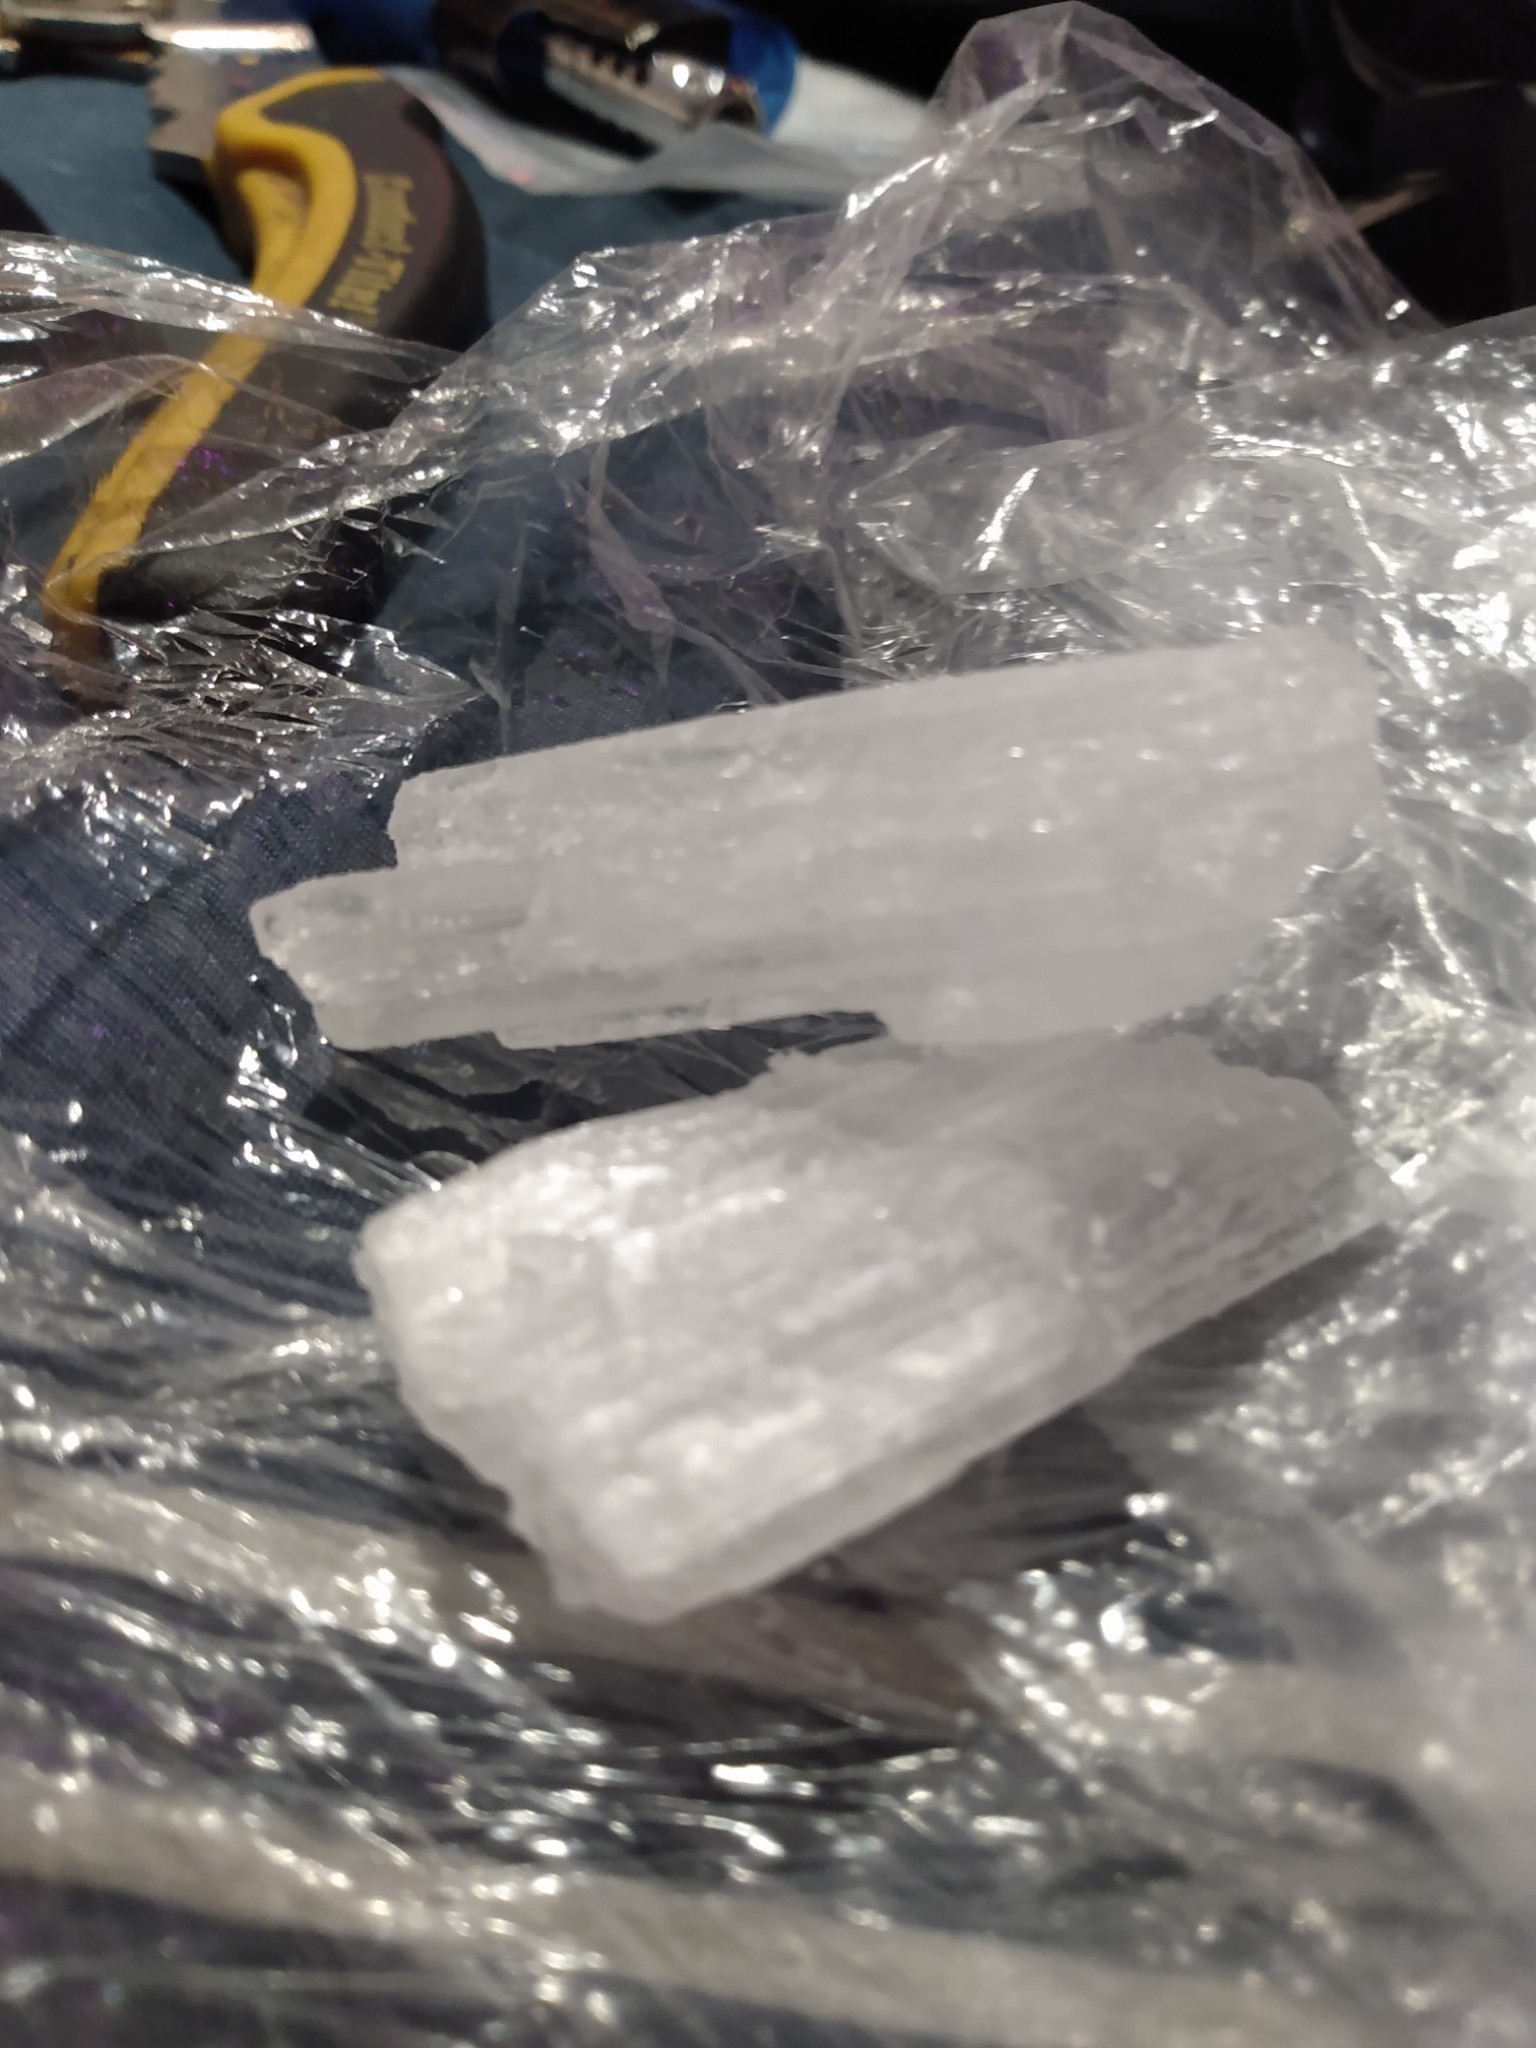 Where to Buy P2P Meth Crystals Online